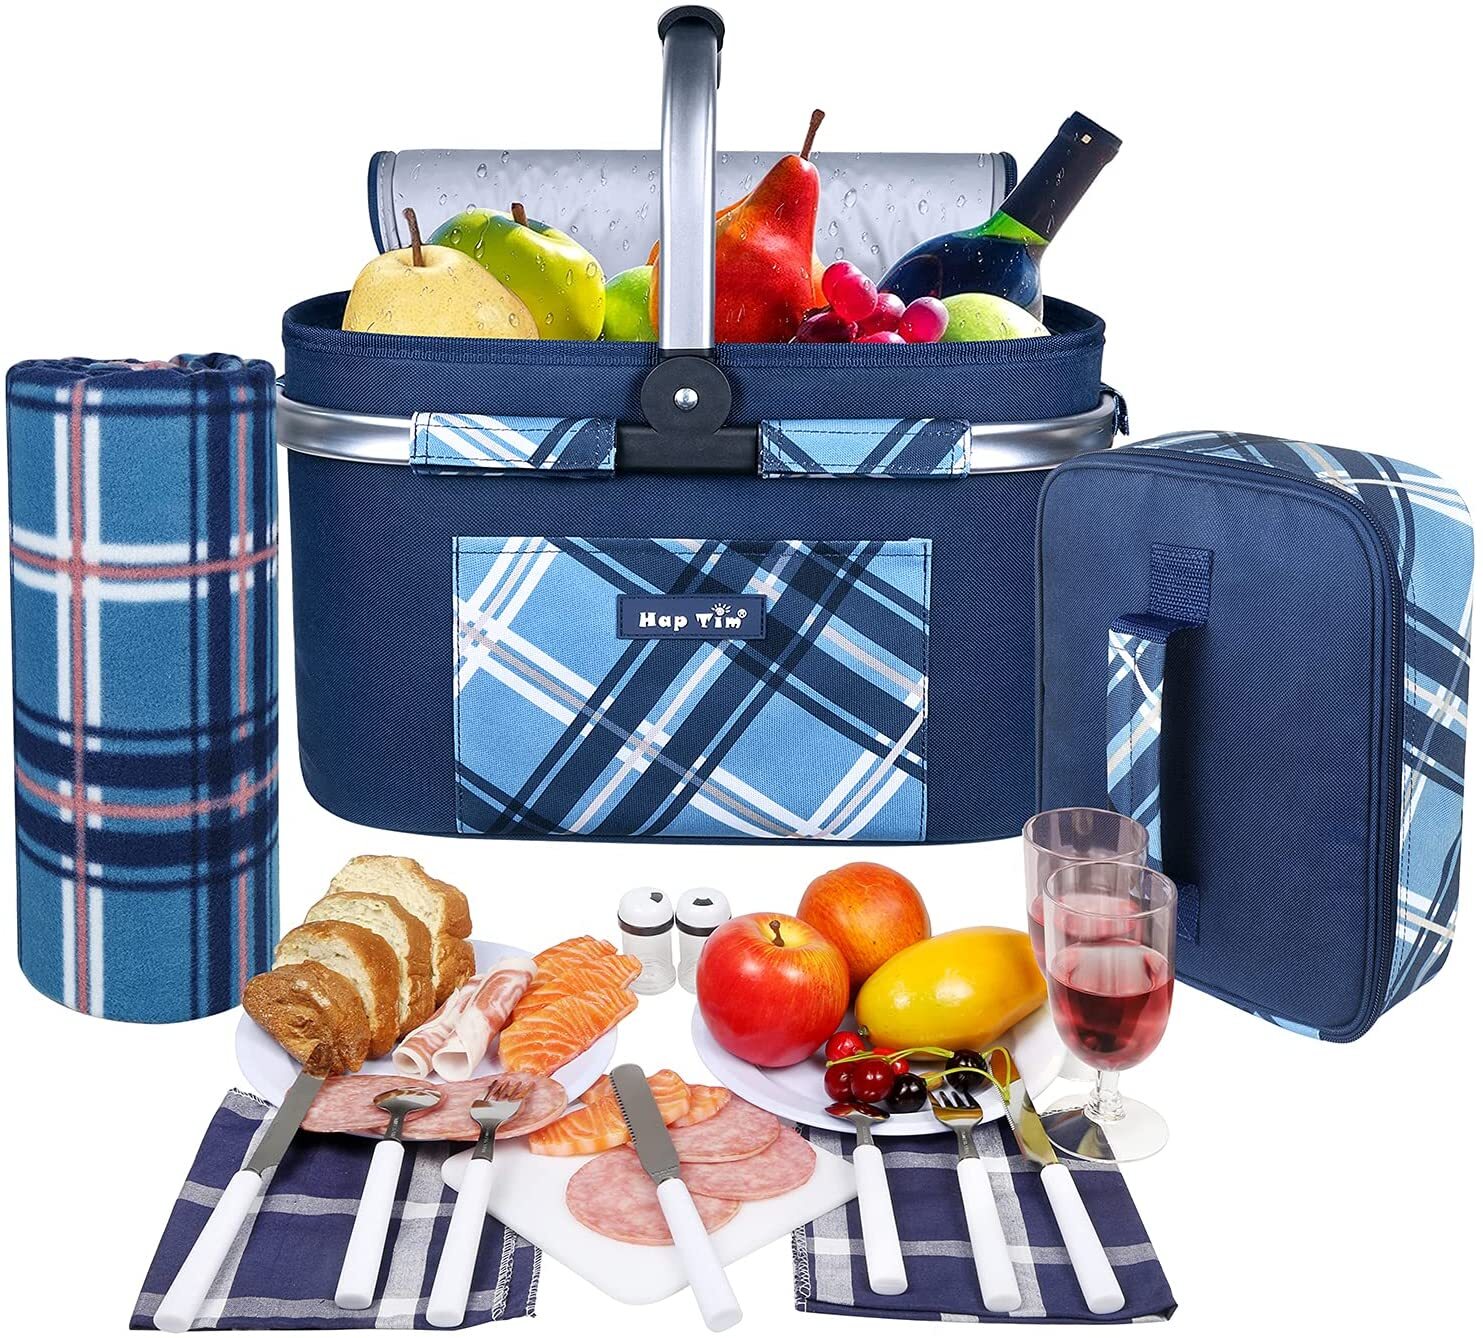 Hap Tim Picnic Basket Backpack for 2 Person with 2 Insulated Cooler  Compartment, Wine Holder, Fleece…See more Hap Tim Picnic Basket Backpack  for 2